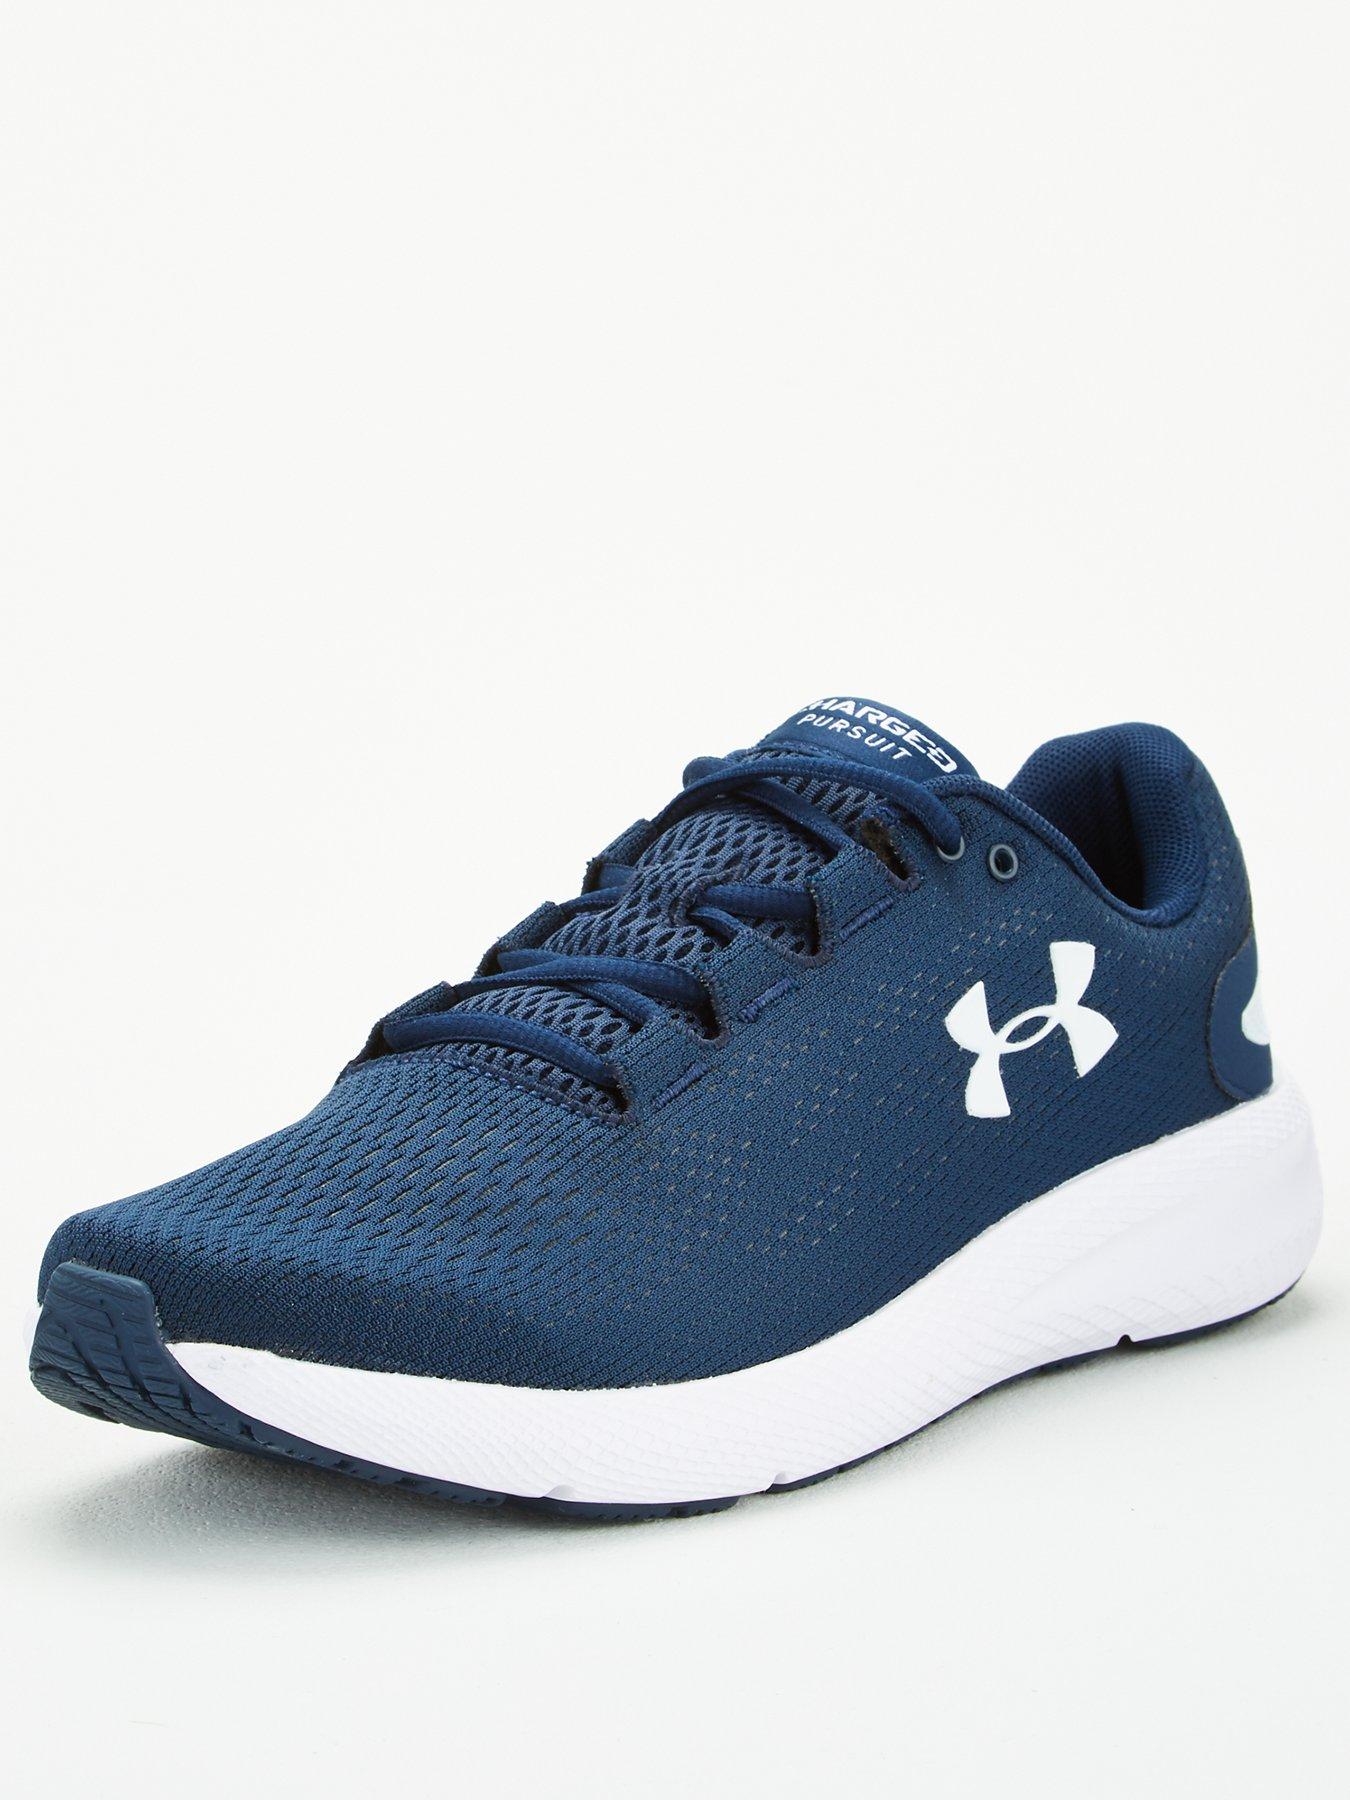 UNDER ARMOUR Charged Pursuit 2 Trainers 